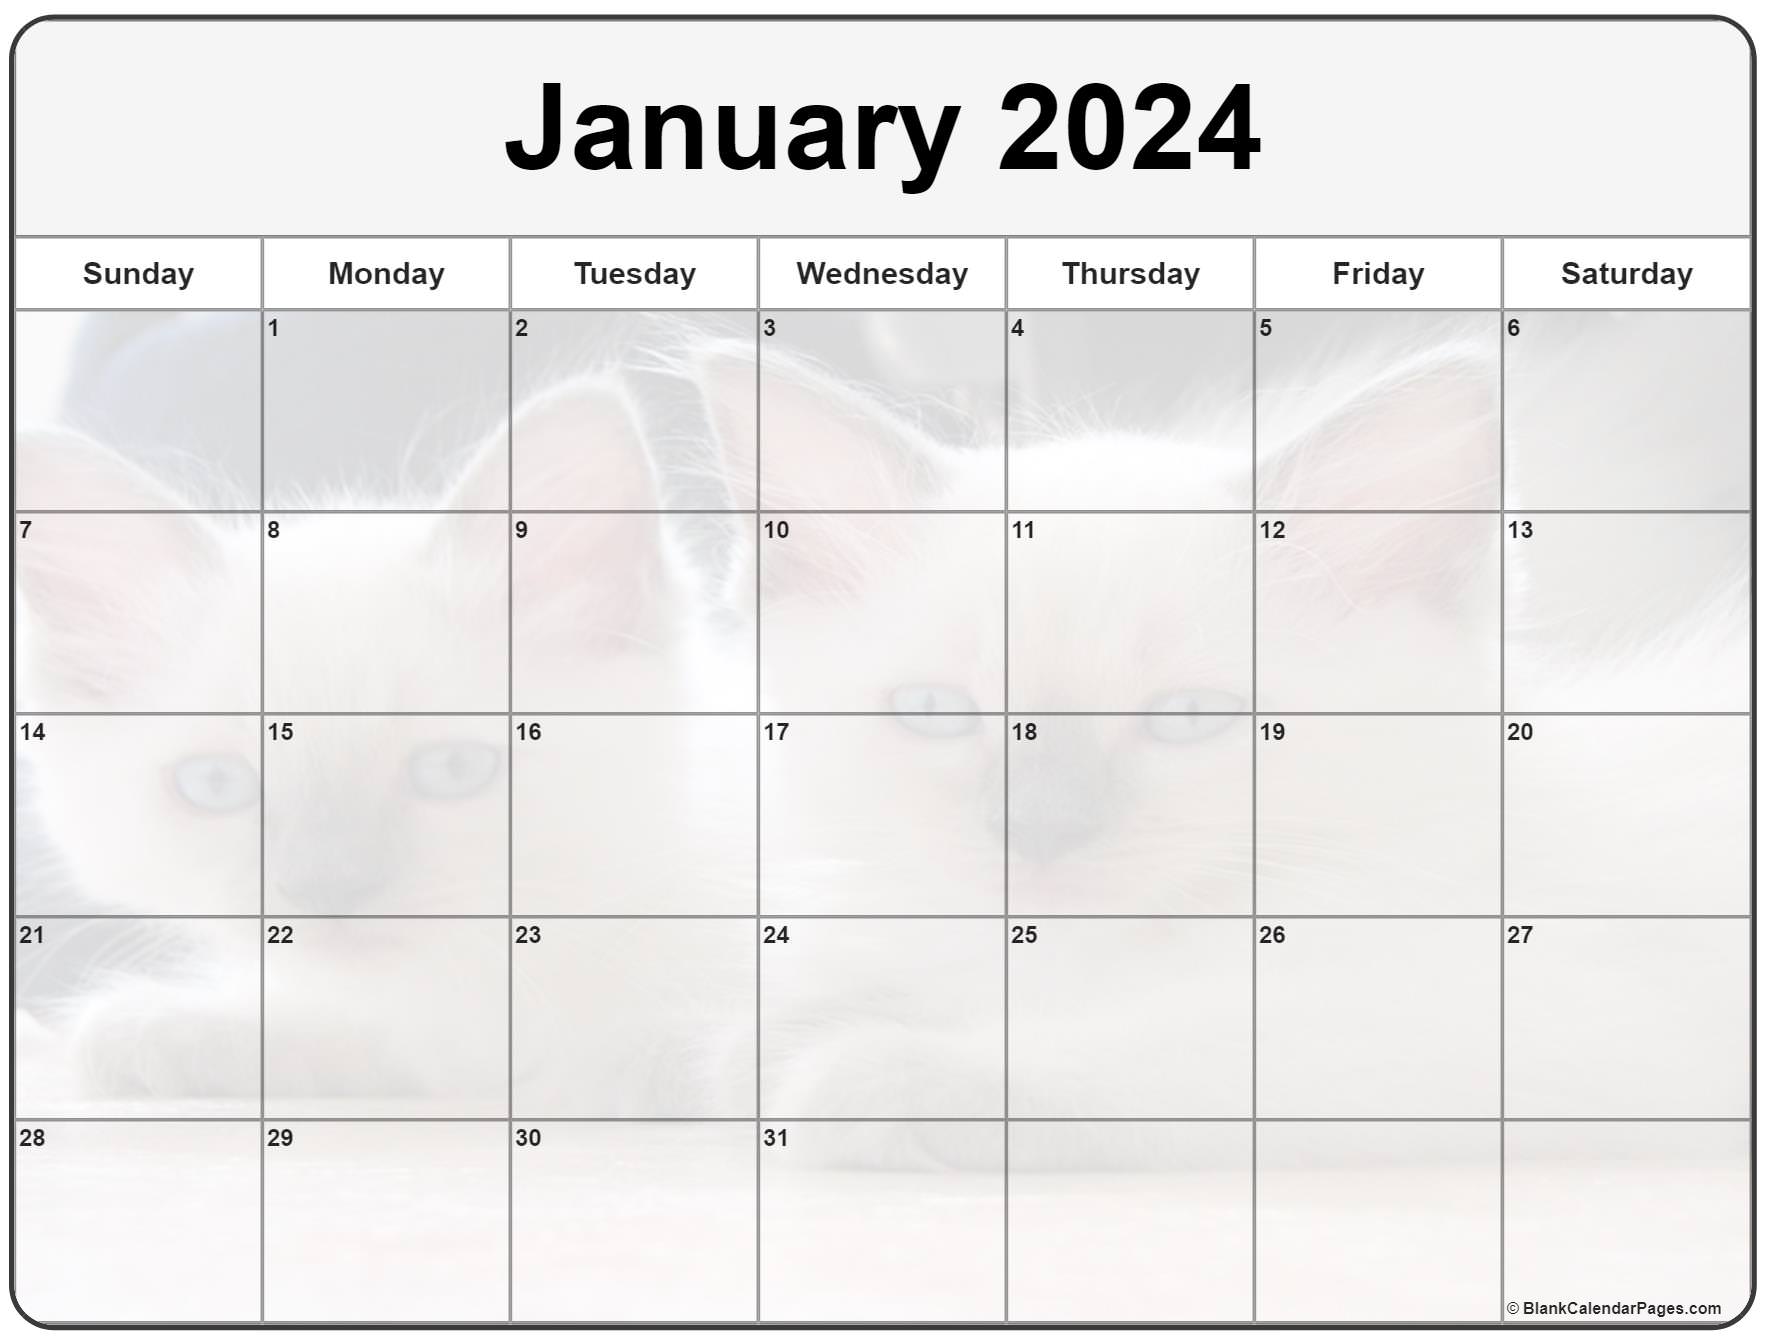 collection-of-january-2023-photo-calendars-with-image-filters